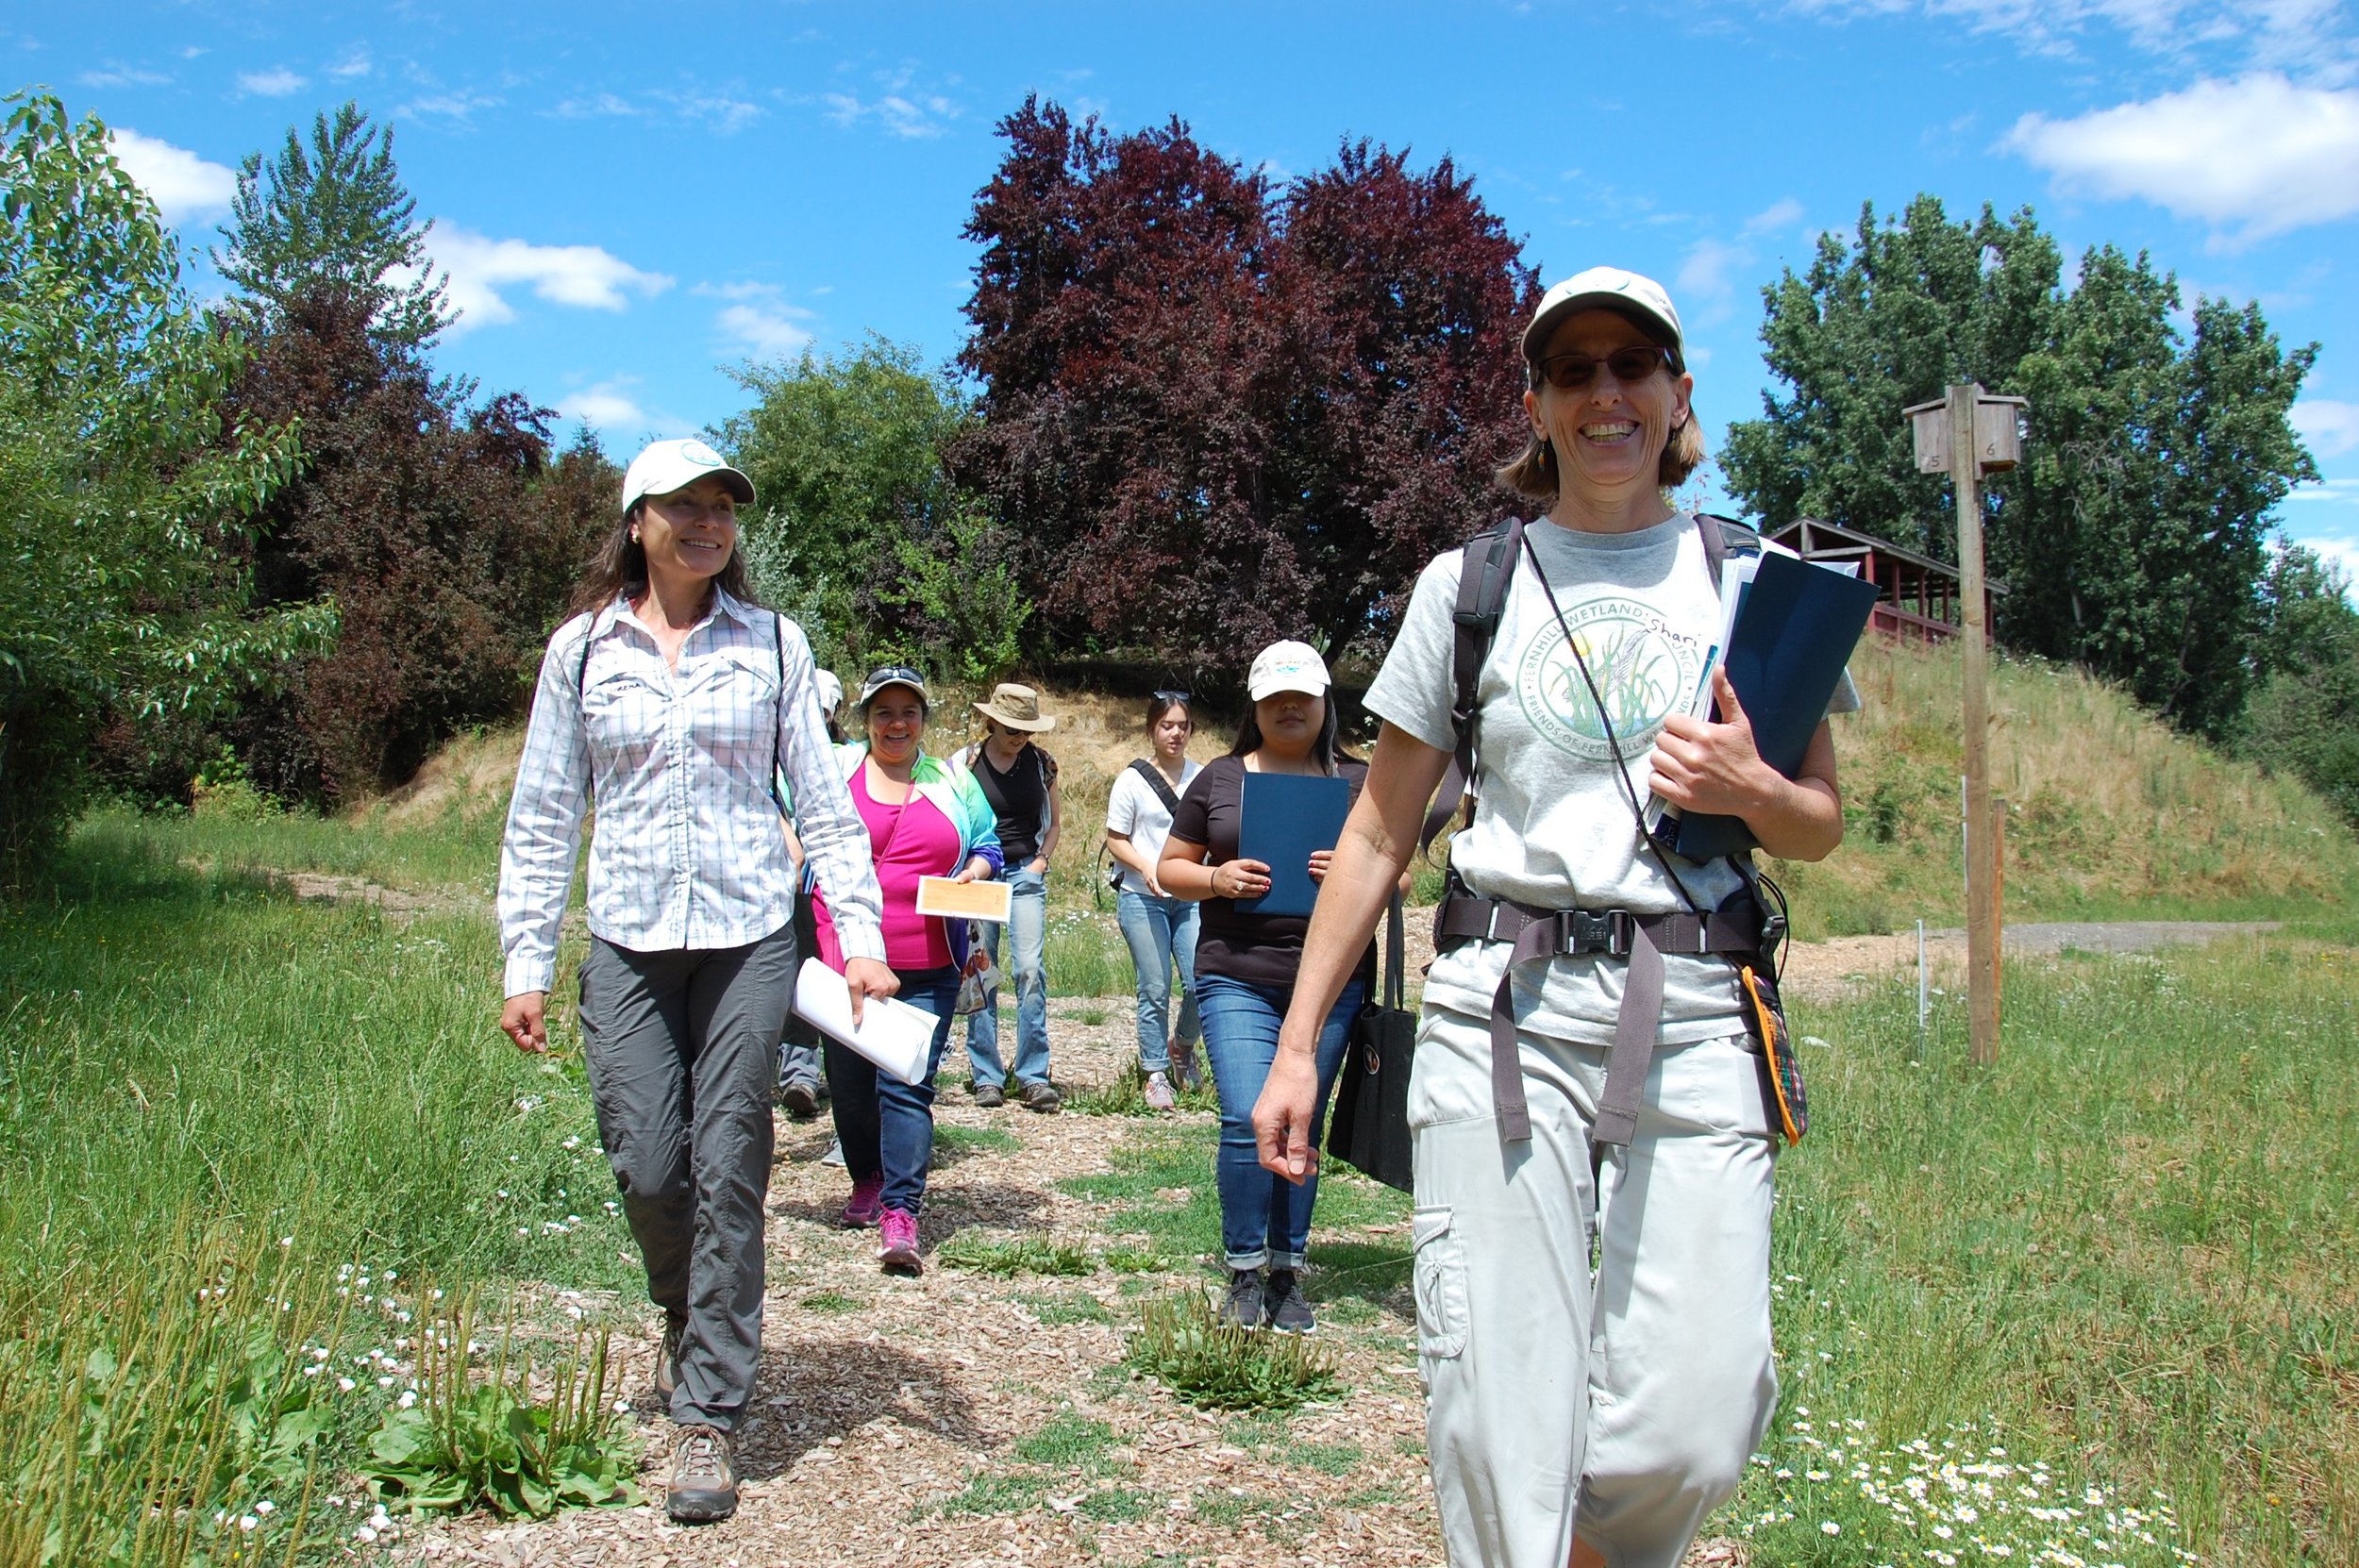  Local ecologists, Lorena (left), and Shari (right), lead members of the group through Jackson Bottom Wetlands. The blue folders contain facts and information that Naturalists will share with their walking groups, both in English and Spanish, as they